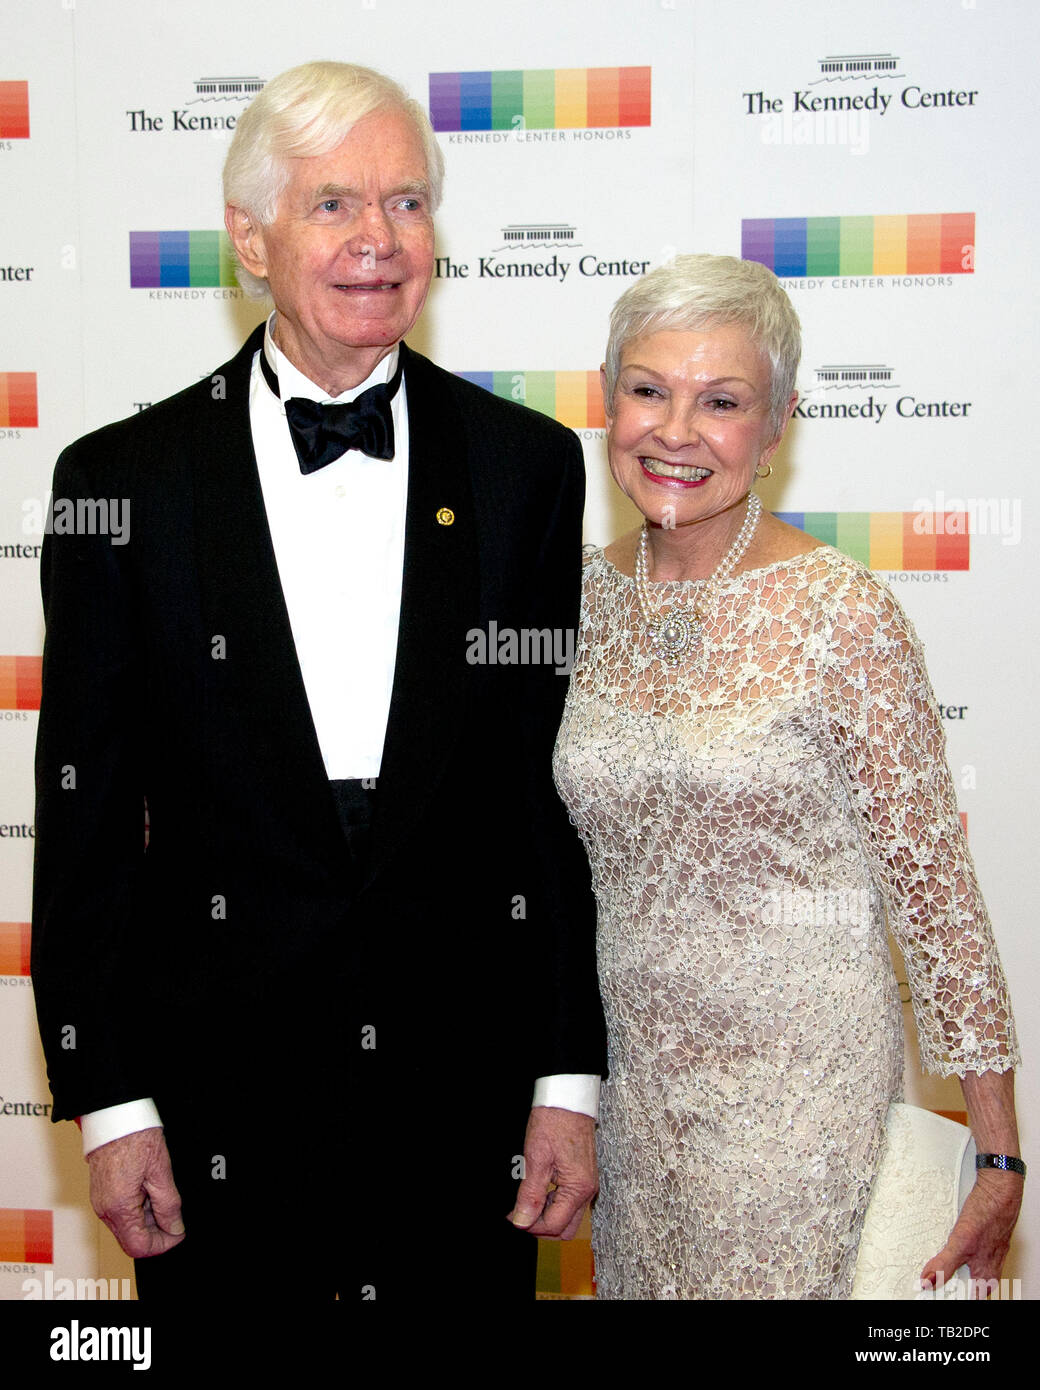 United States Senator Thad Cochran (Republican of Mississippi) and his wife, Kay Webber, arrive for the formal Artist's Dinner honoring the recipients of the 39th Annual Kennedy Center Honors hosted by United States Secretary of State John F. Kerry at the U.S. Department of State in Washington, DC on Saturday, December 3, 2016. The 2016 honorees are: Argentine pianist Martha Argerich; rock band the Eagles; screen and stage actor Al Pacino; gospel and blues singer Mavis Staples; and musician James Taylor. Credit: Ron Sachs/Pool via CNP | usage worldwide Stock Photo